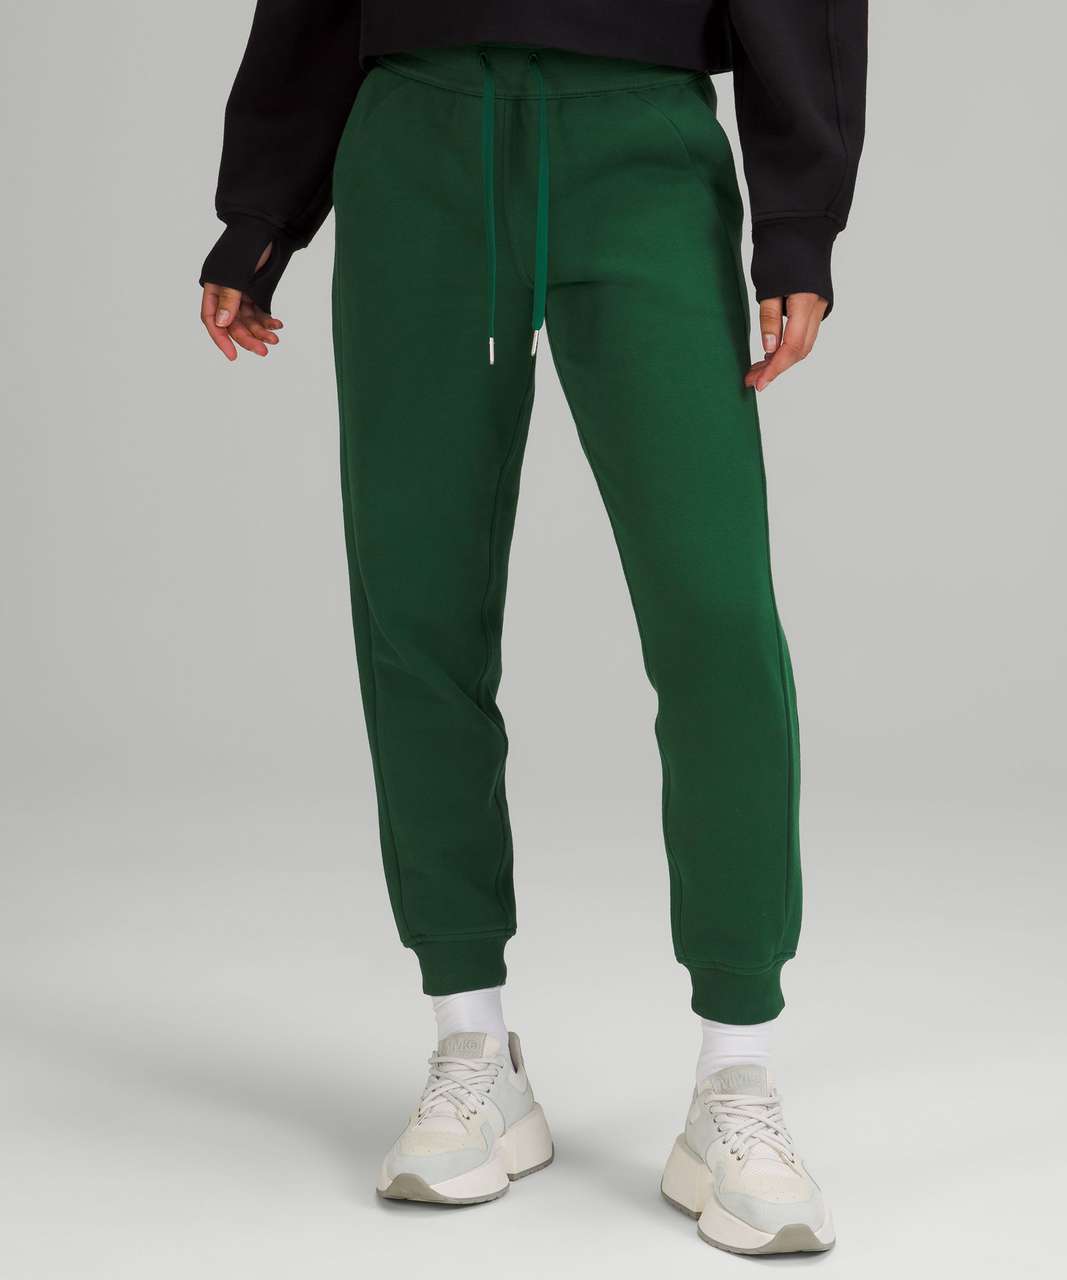 Can't decide if the everglade green scuba is a keeper! Size M/L 5'3 with  savannah WTs : r/lululemon